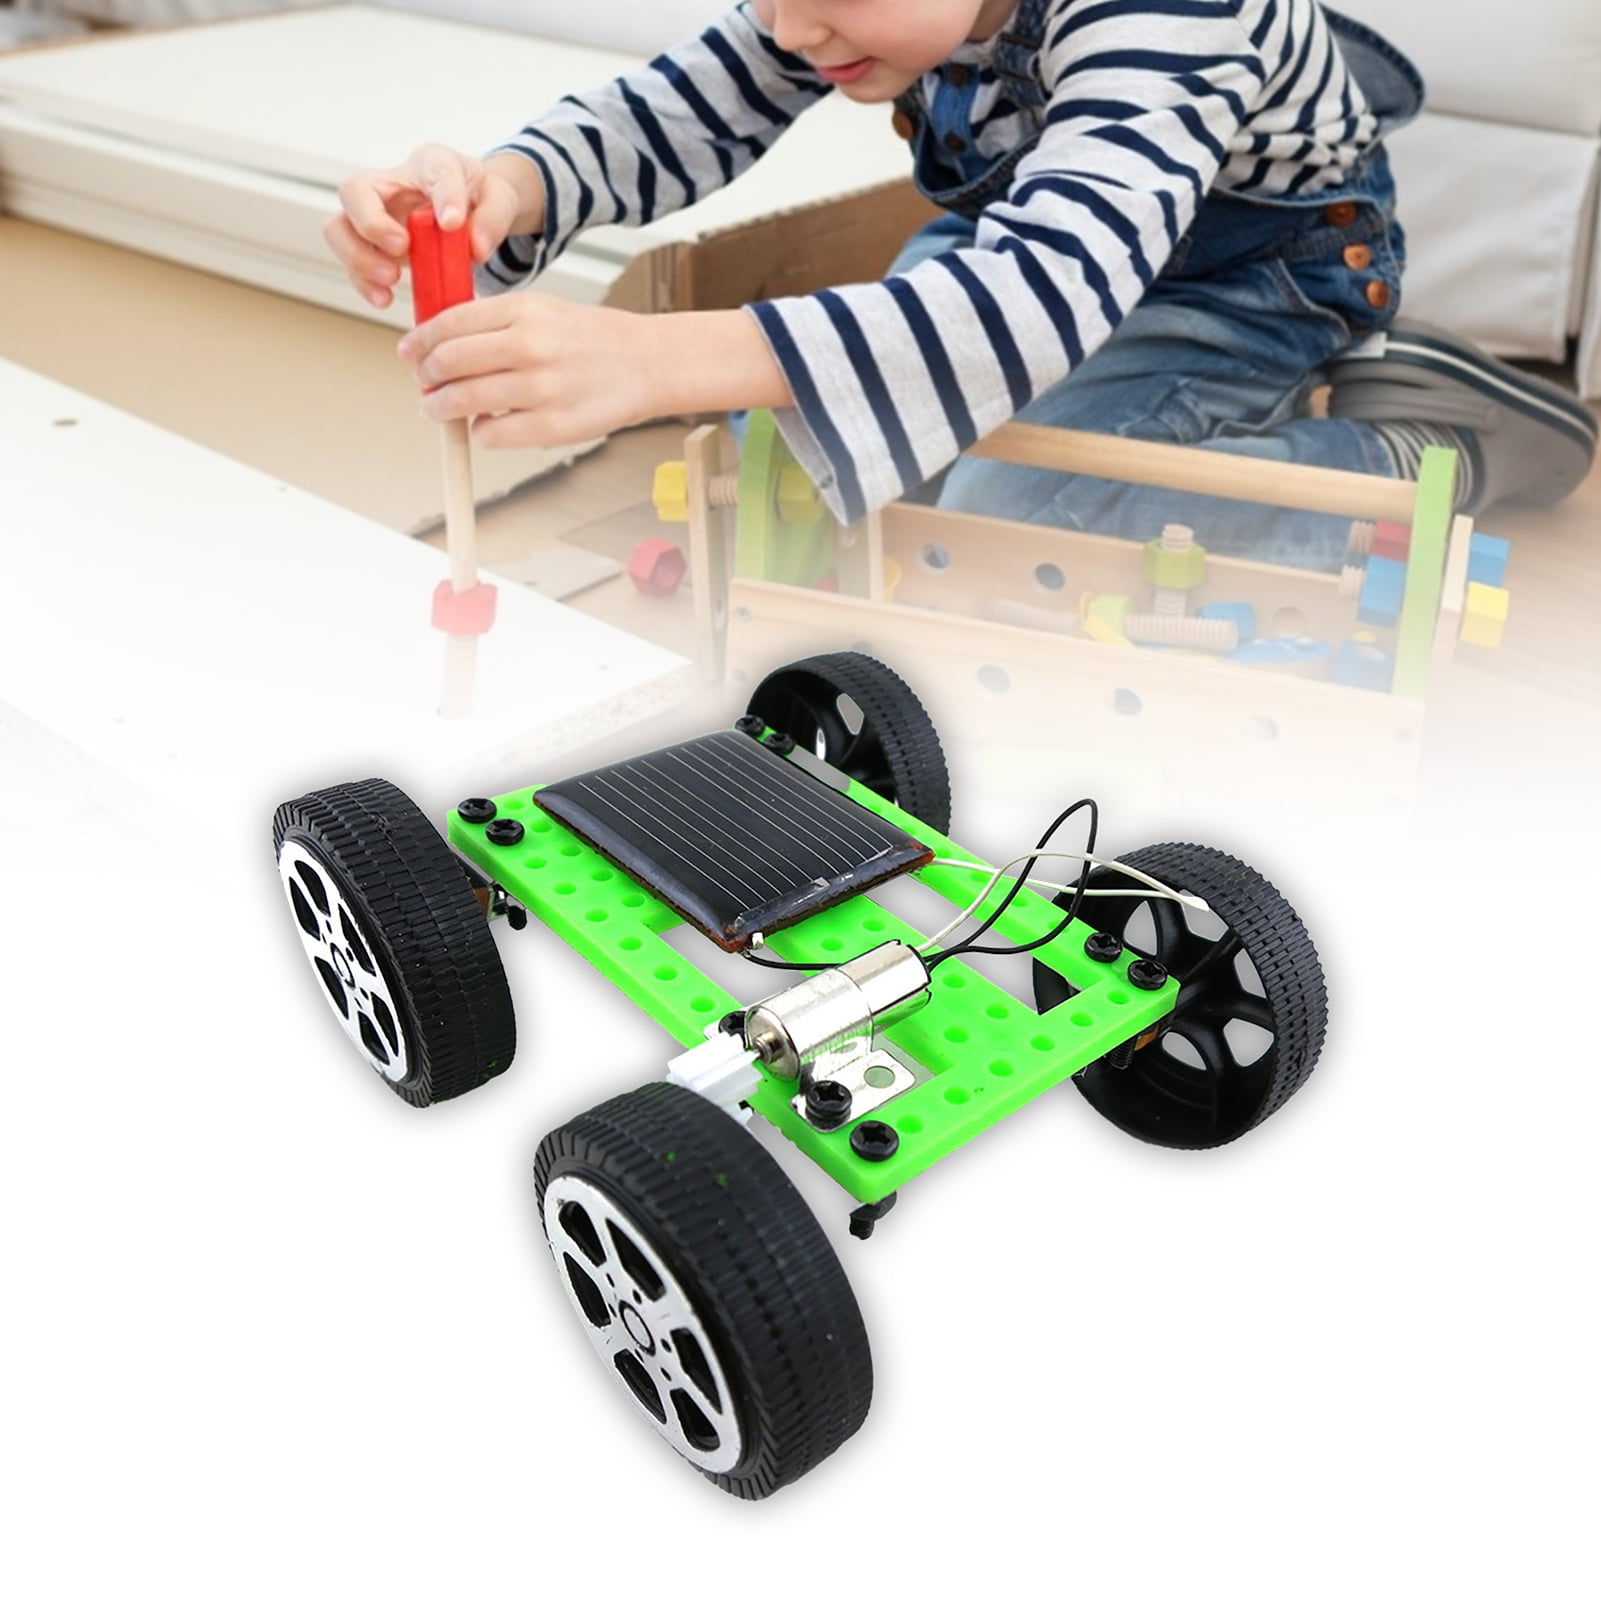 Details about   Small   Electric   Motor   Kit   Kids   Educational   Toy   for 